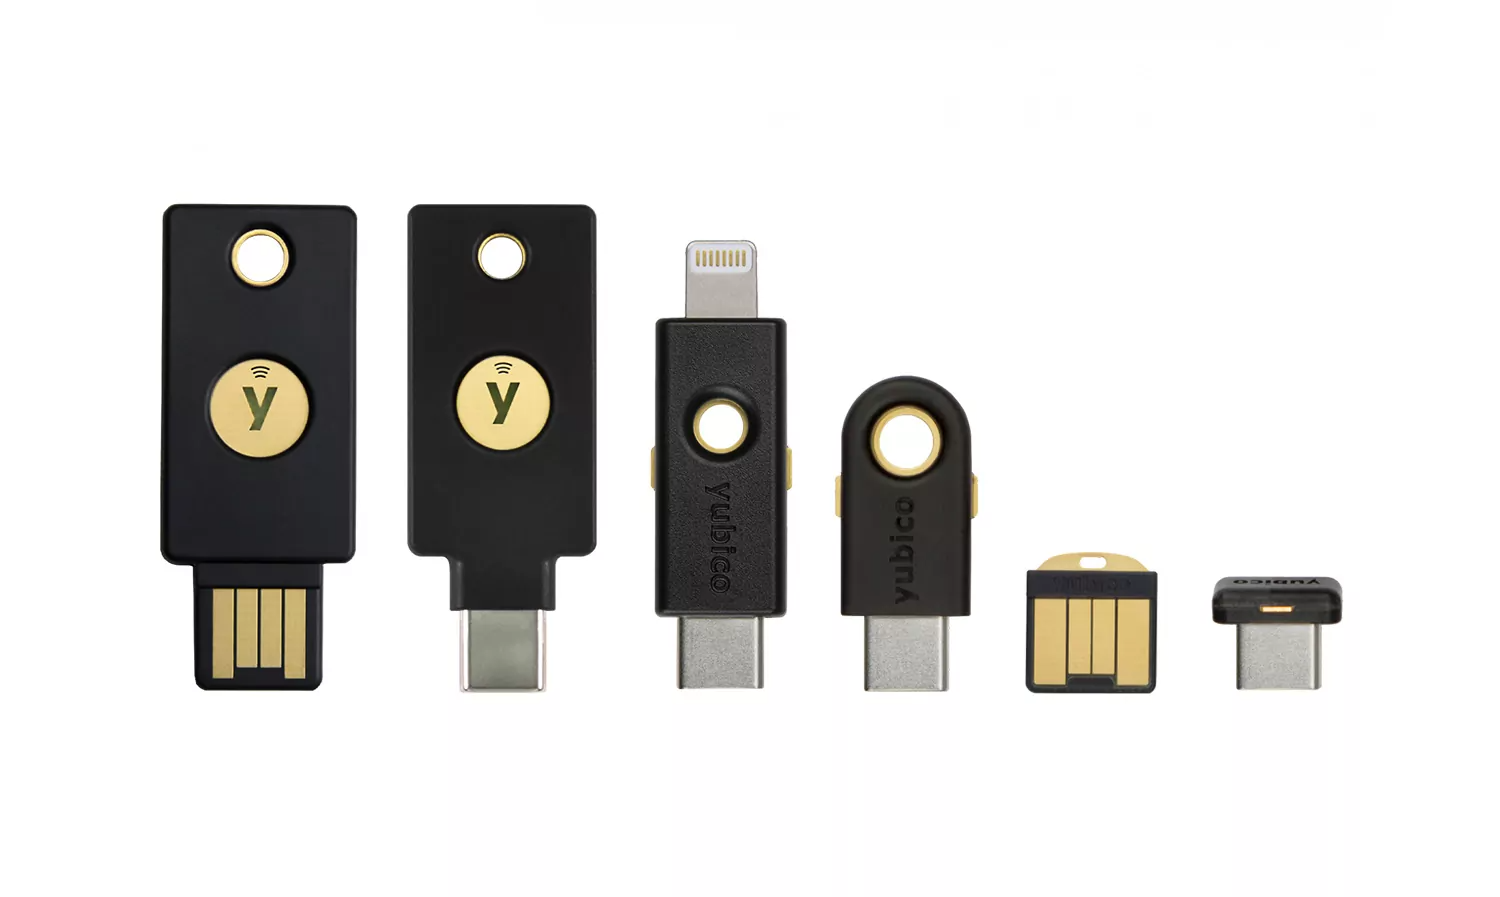 Key Considerations Before Investing In YubiKey USB